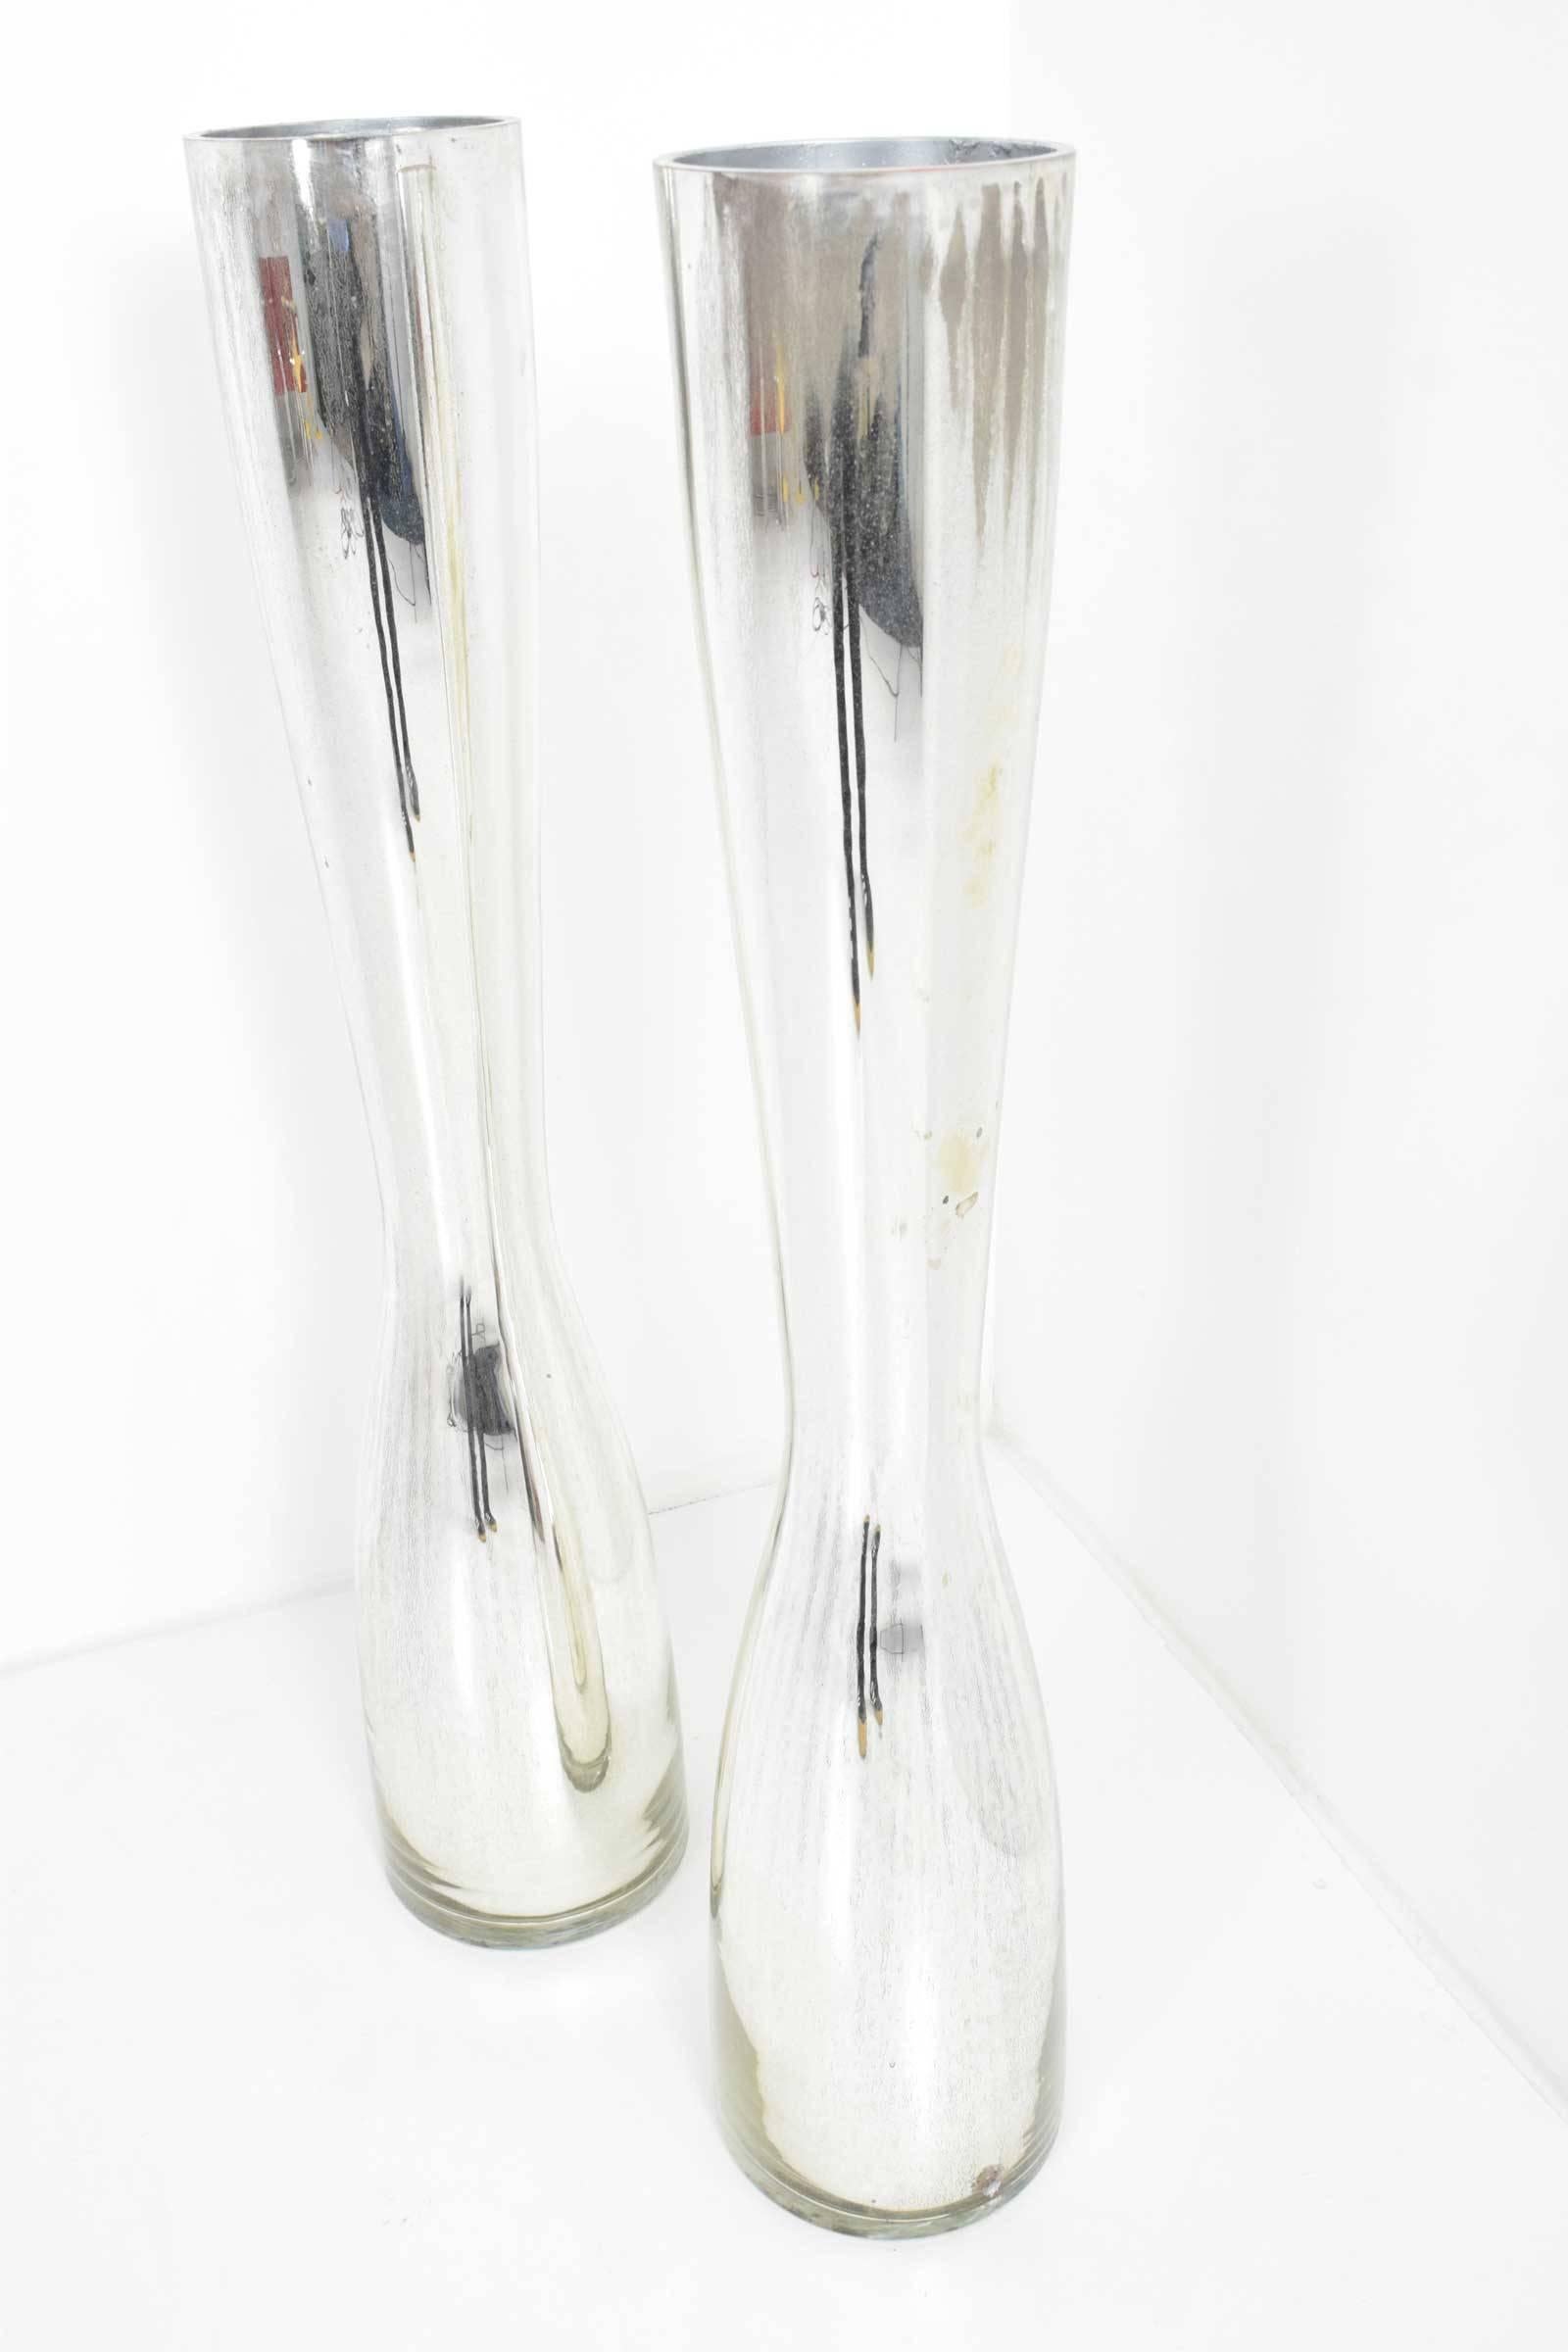 These vases are very tall, 39.5